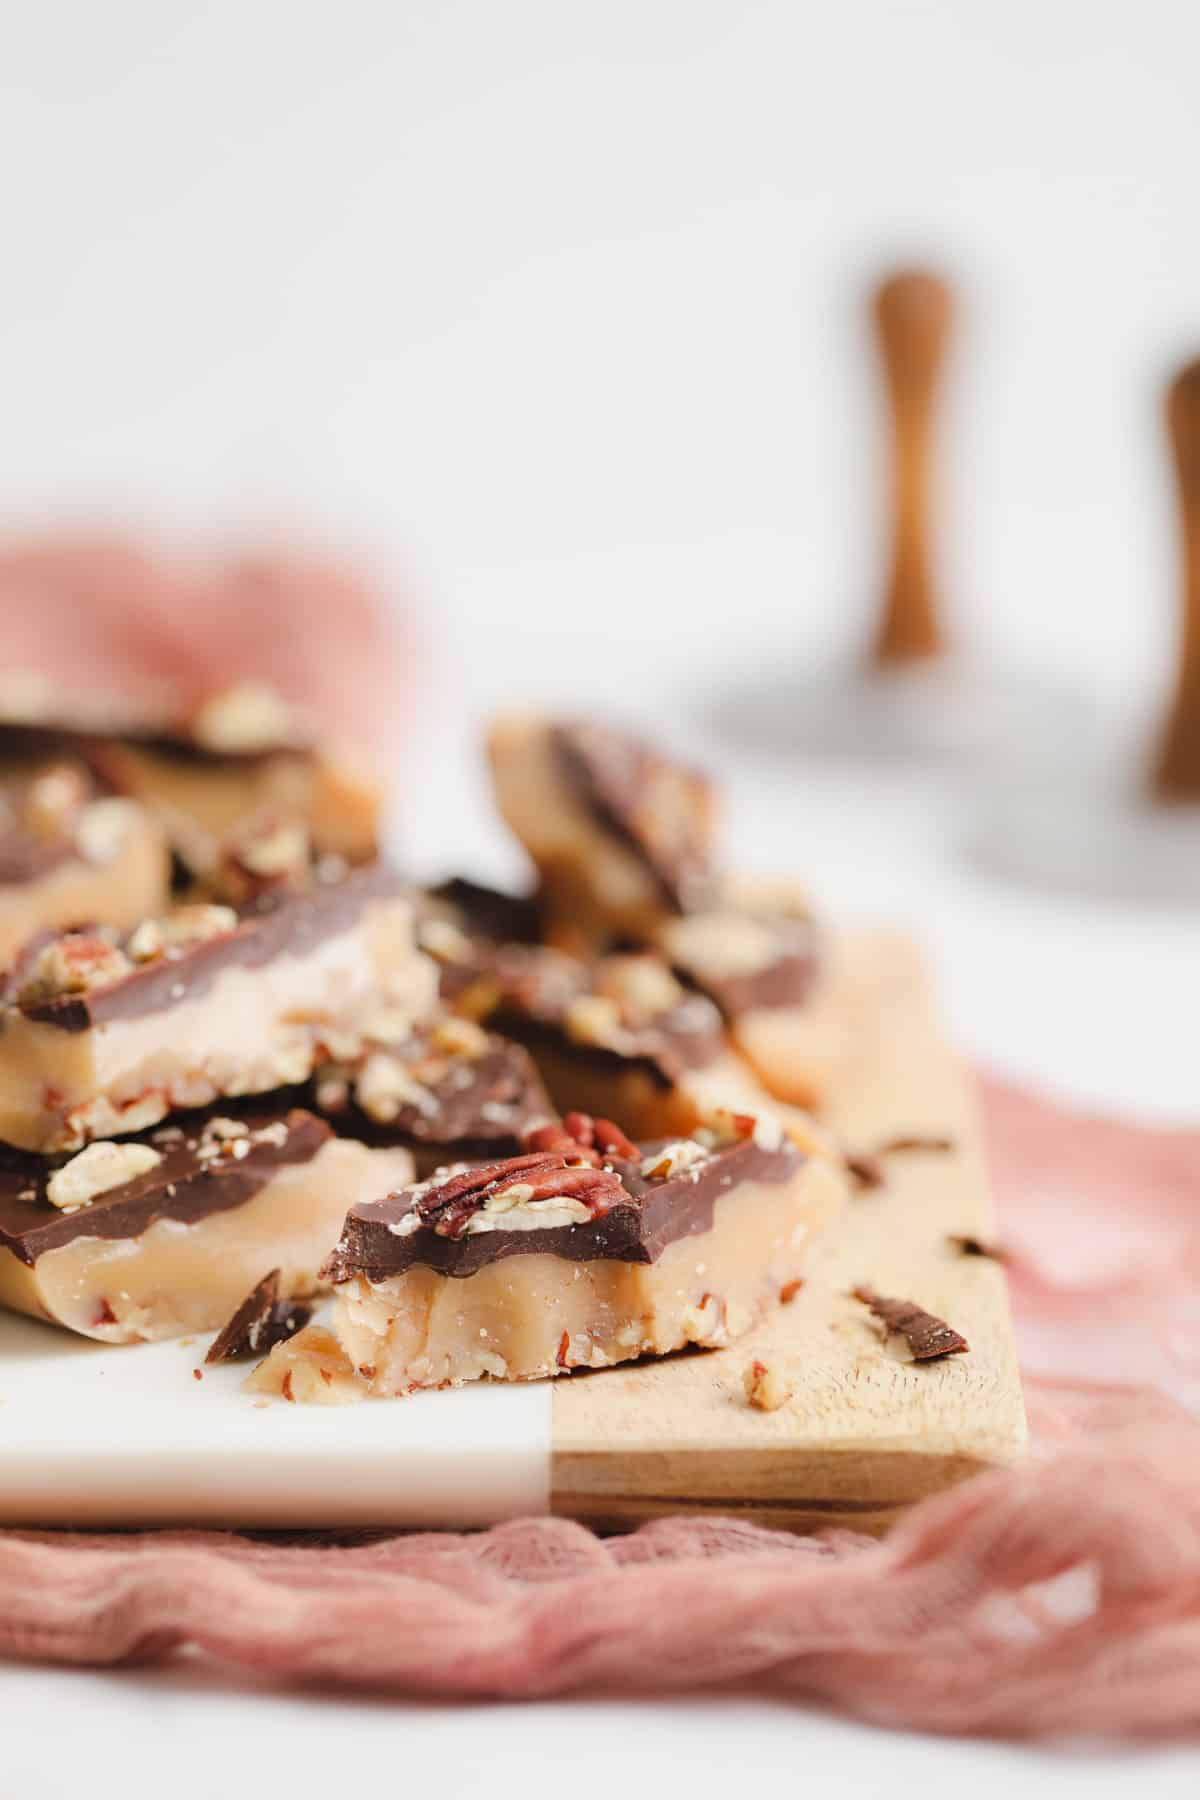 vegan toffee with chocolate and nuts on white and wood board.